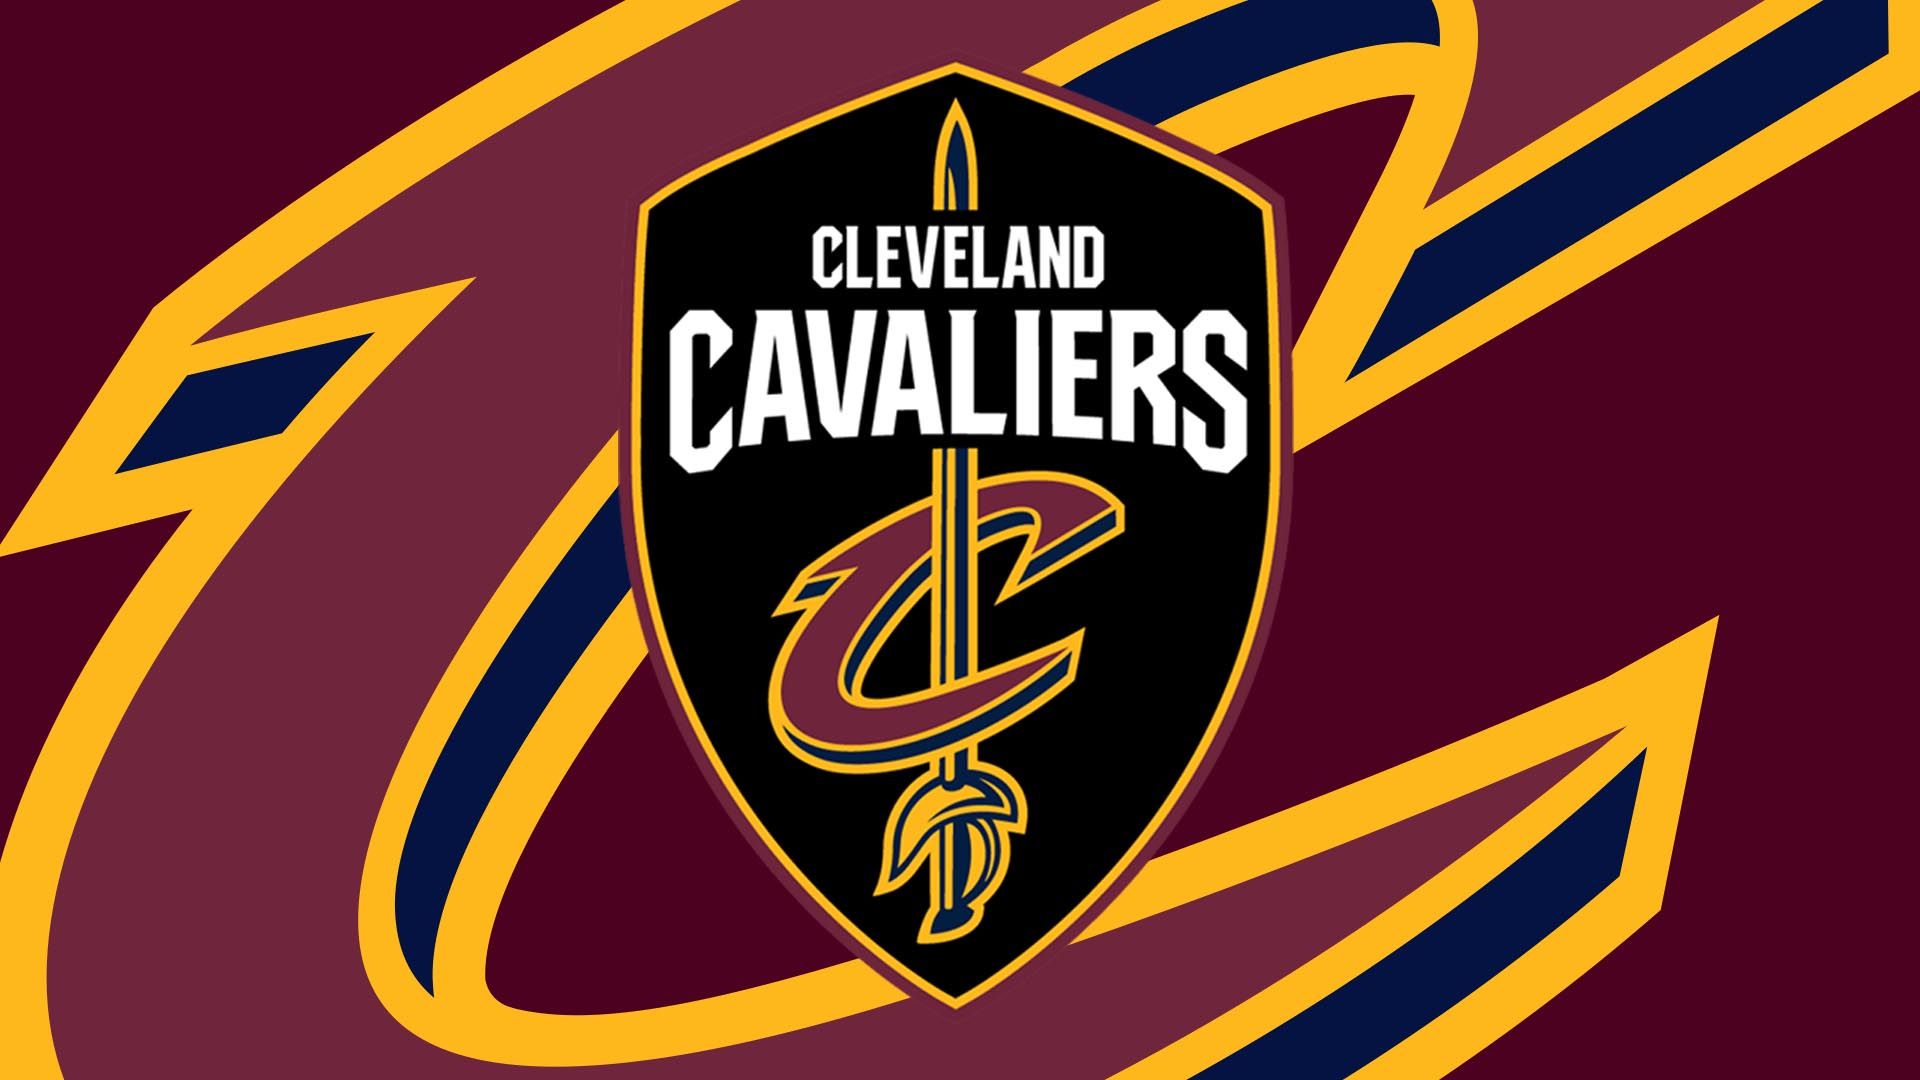 Cleveland Cavaliers Desktop Wallpaper is the perfect High Quality